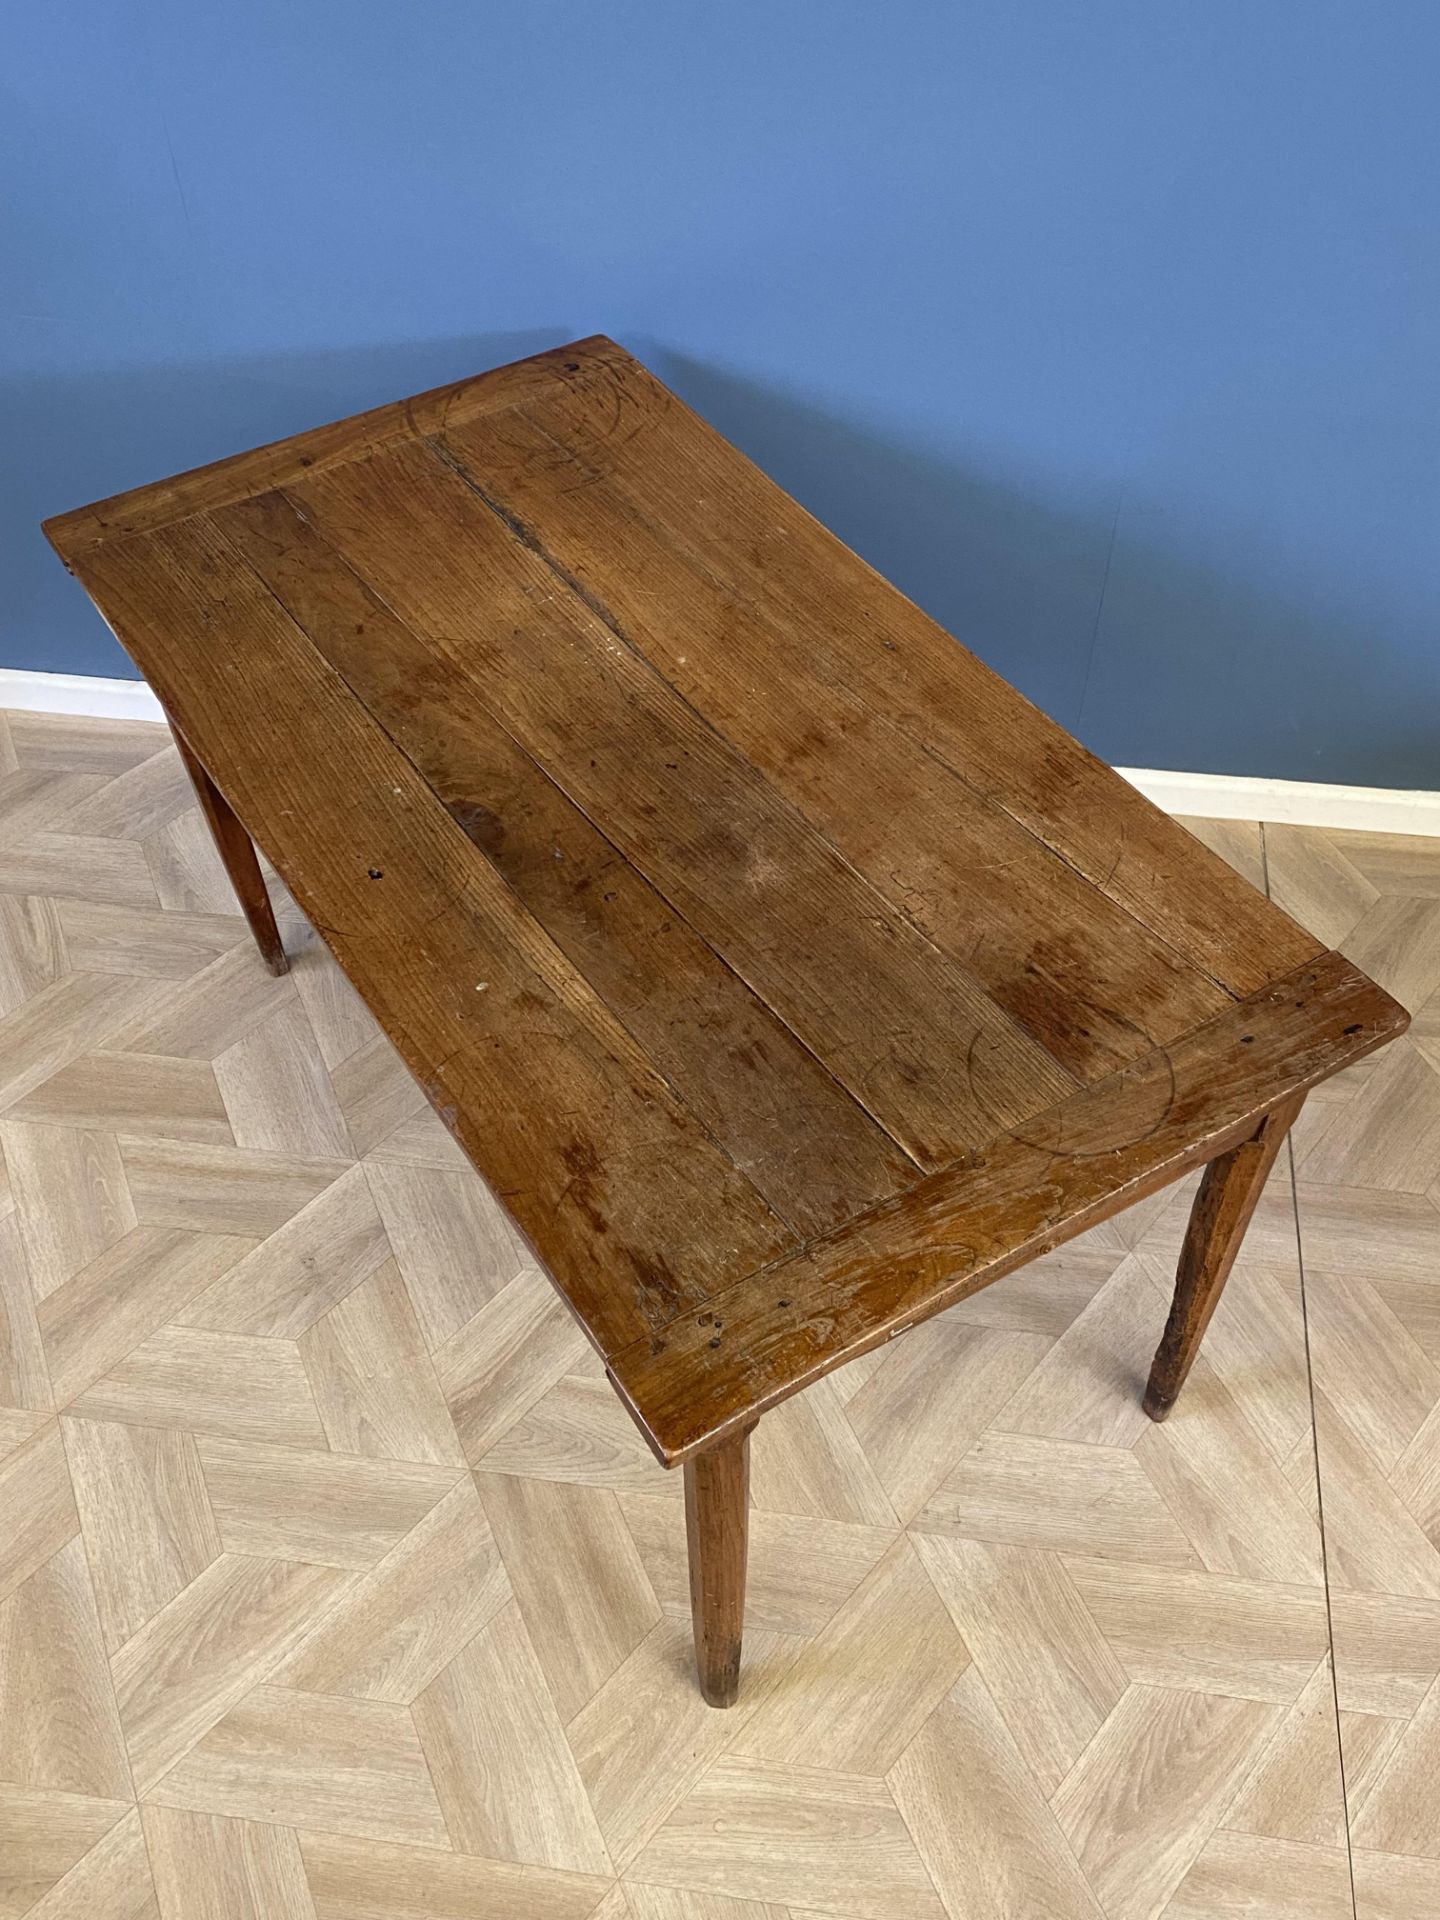 Early 19th century French fruitwood farmhouse table - Image 5 of 6